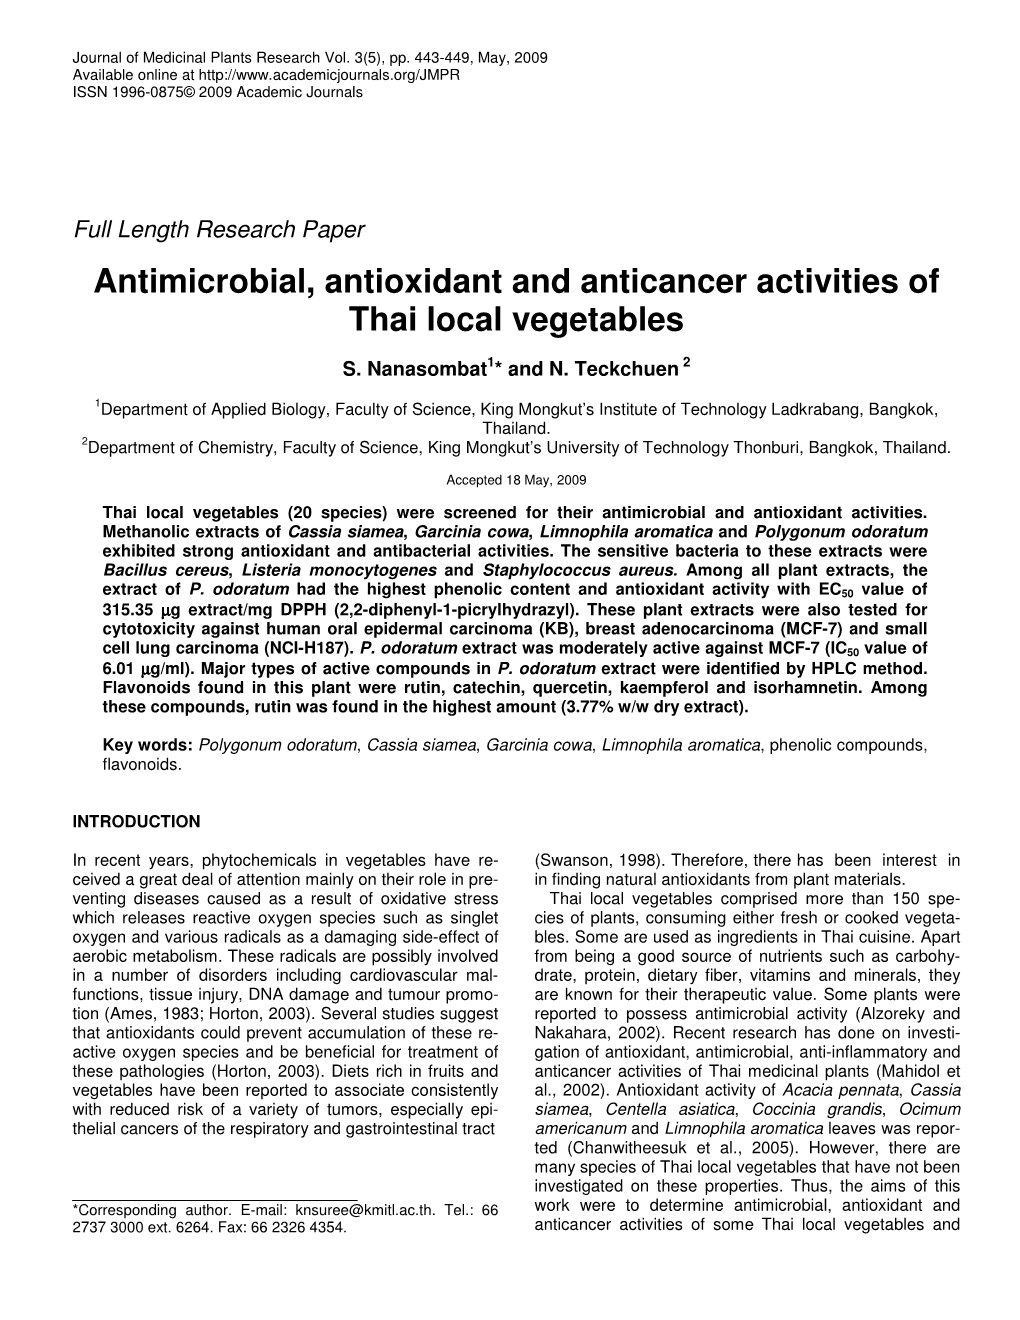 Antimicrobial, Antioxidant and Anticancer Activities of Thai Local Vegetables